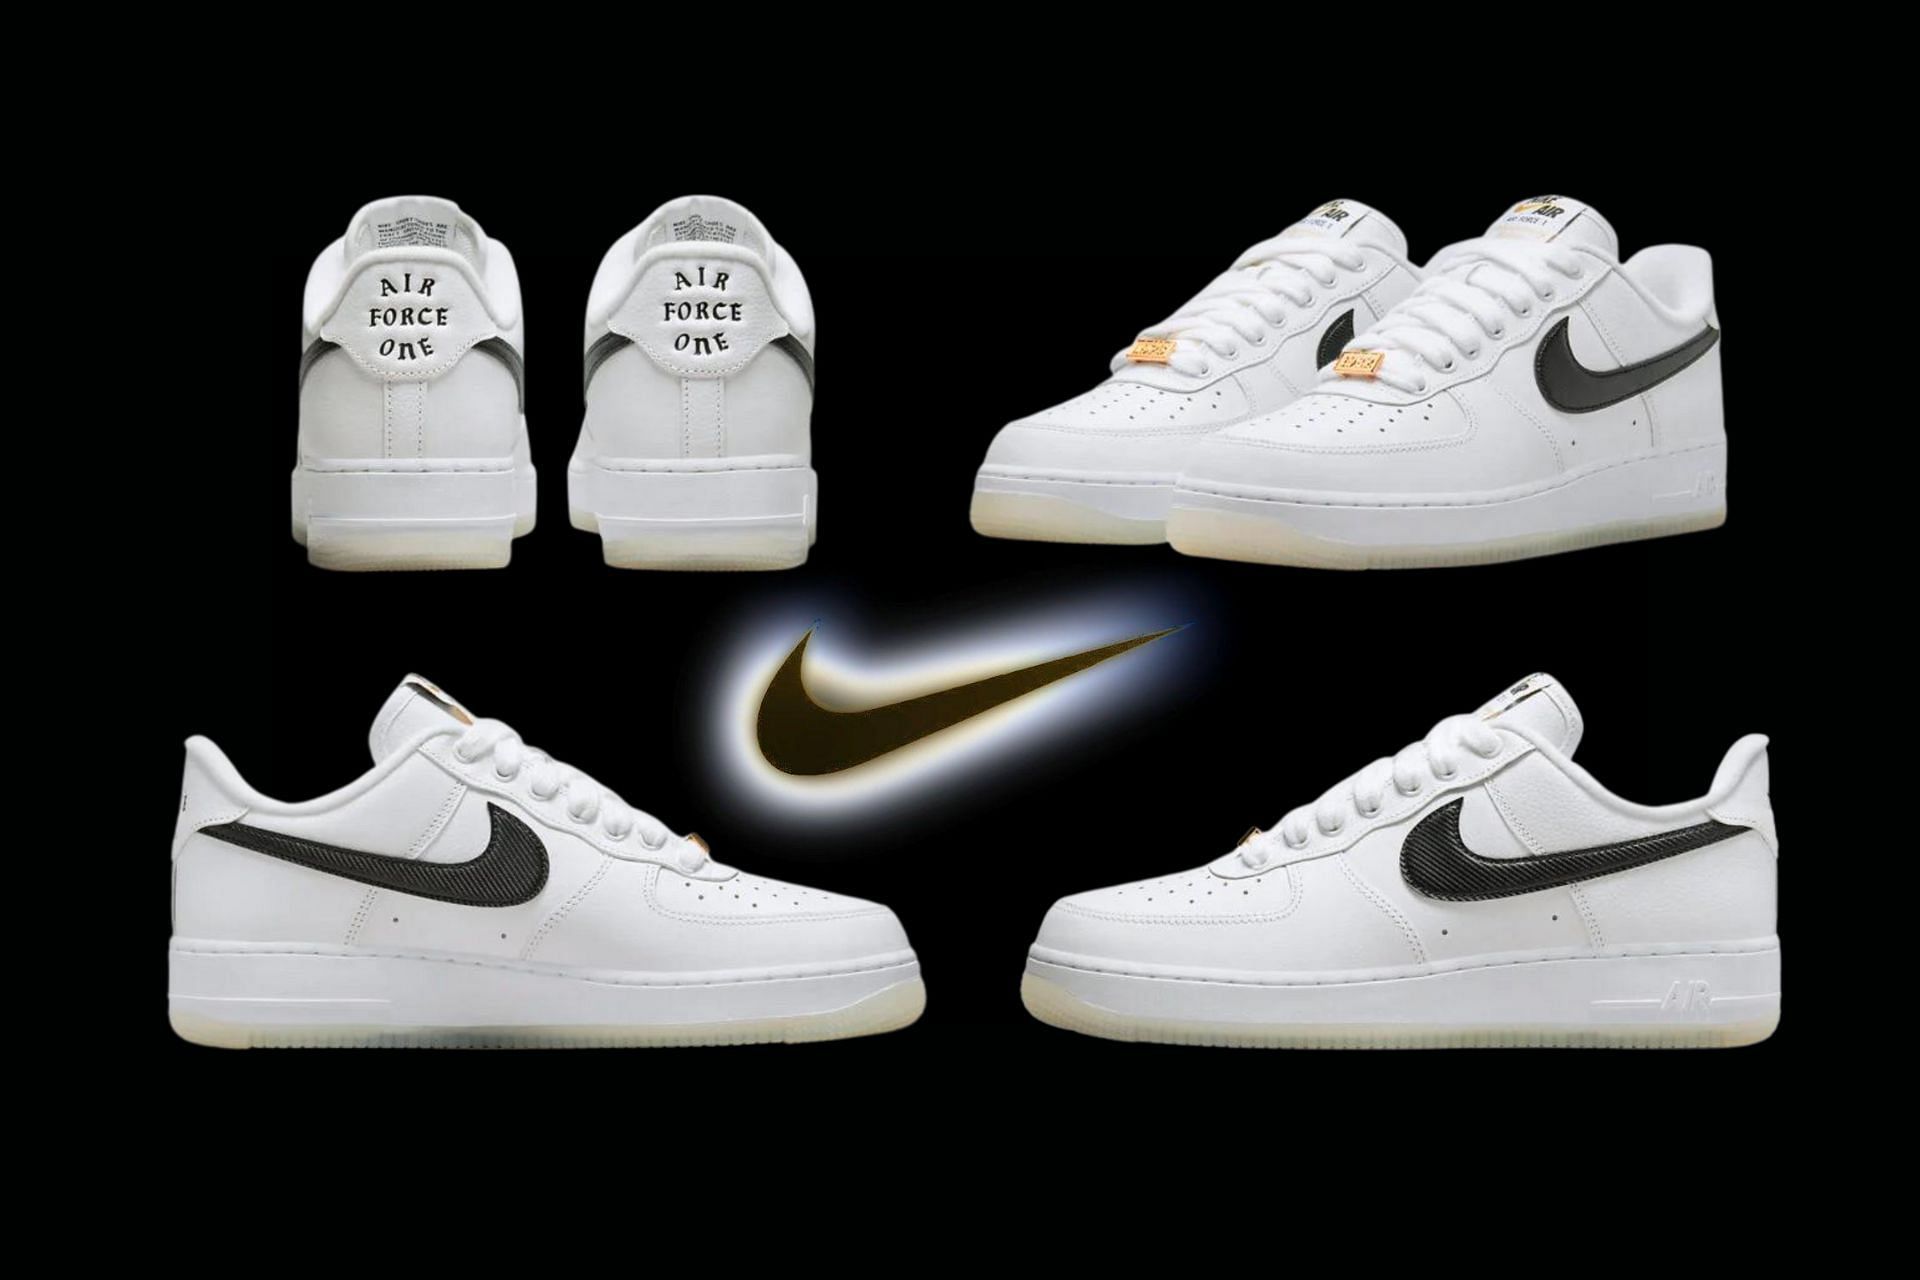 Where to buy Nike Air Force 1 Low Bronx Origins shoes? Price 